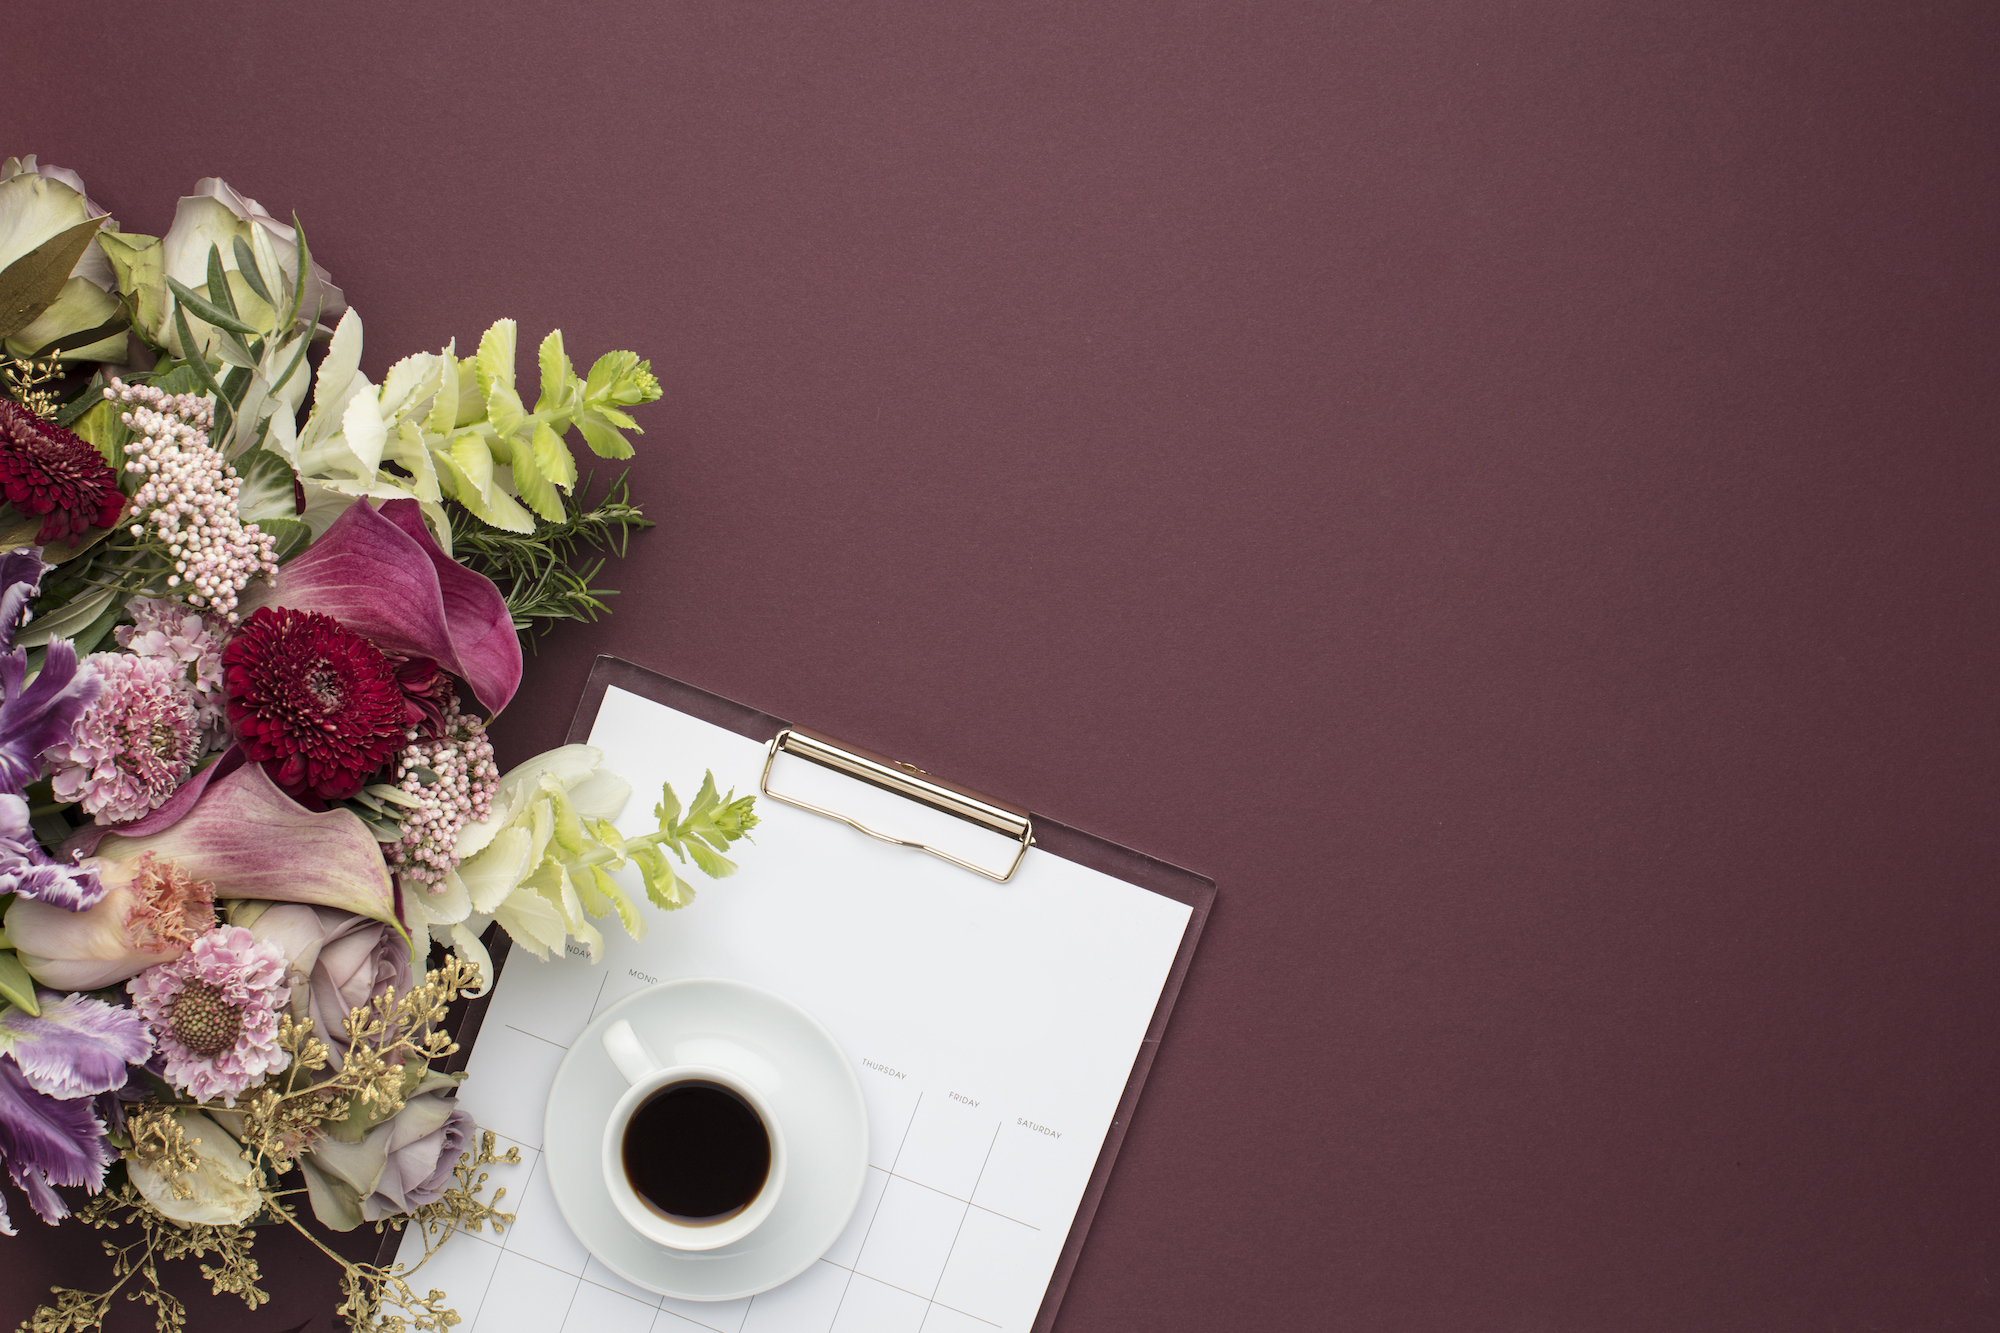 coffee cup and clipboard on a maroon background with a bouquet of flowers